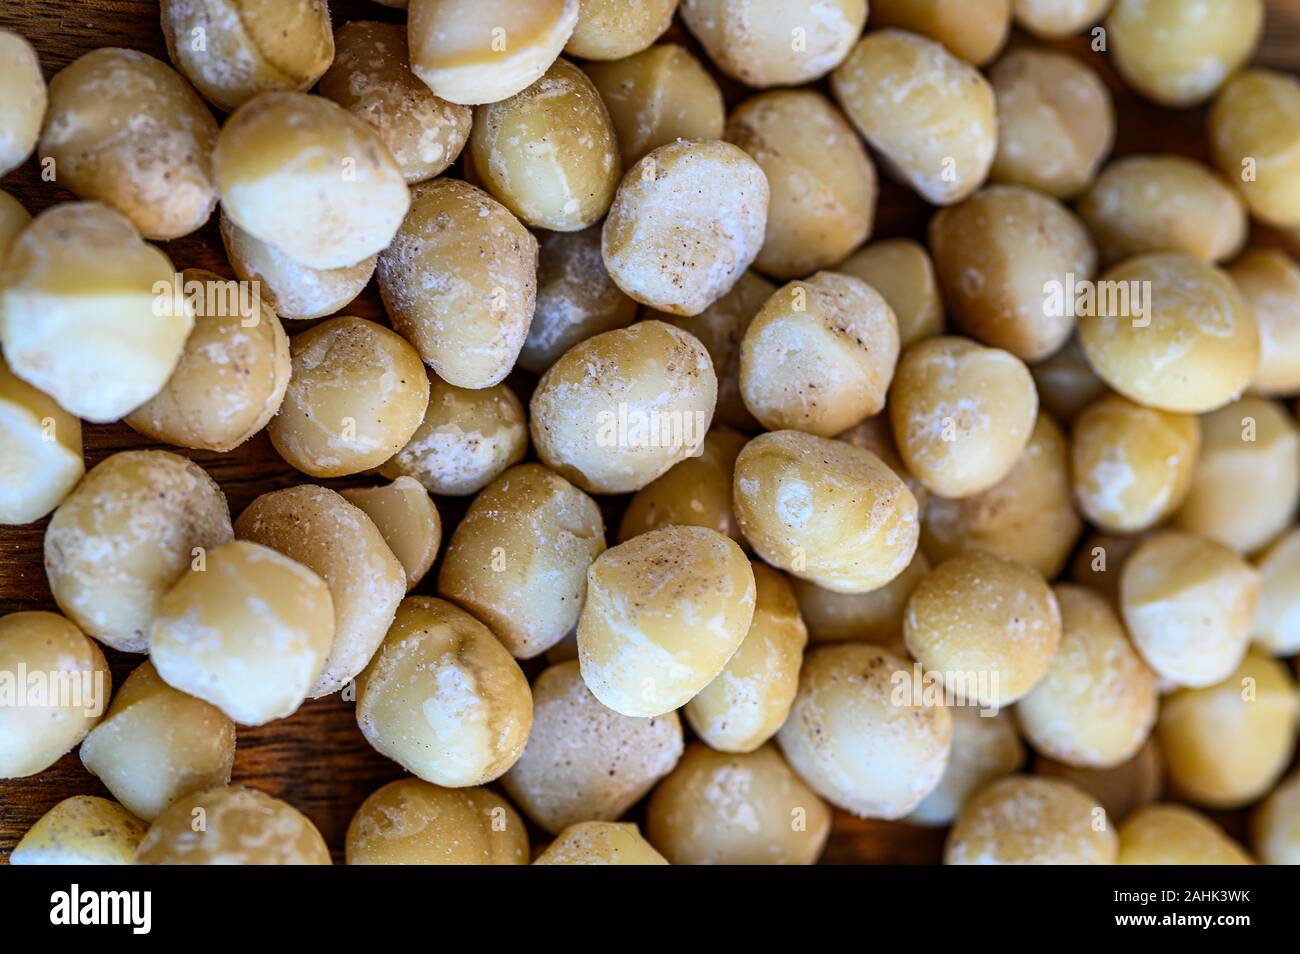 A close-up of delicious raw macadamia nuts on wooden table Stock Photo